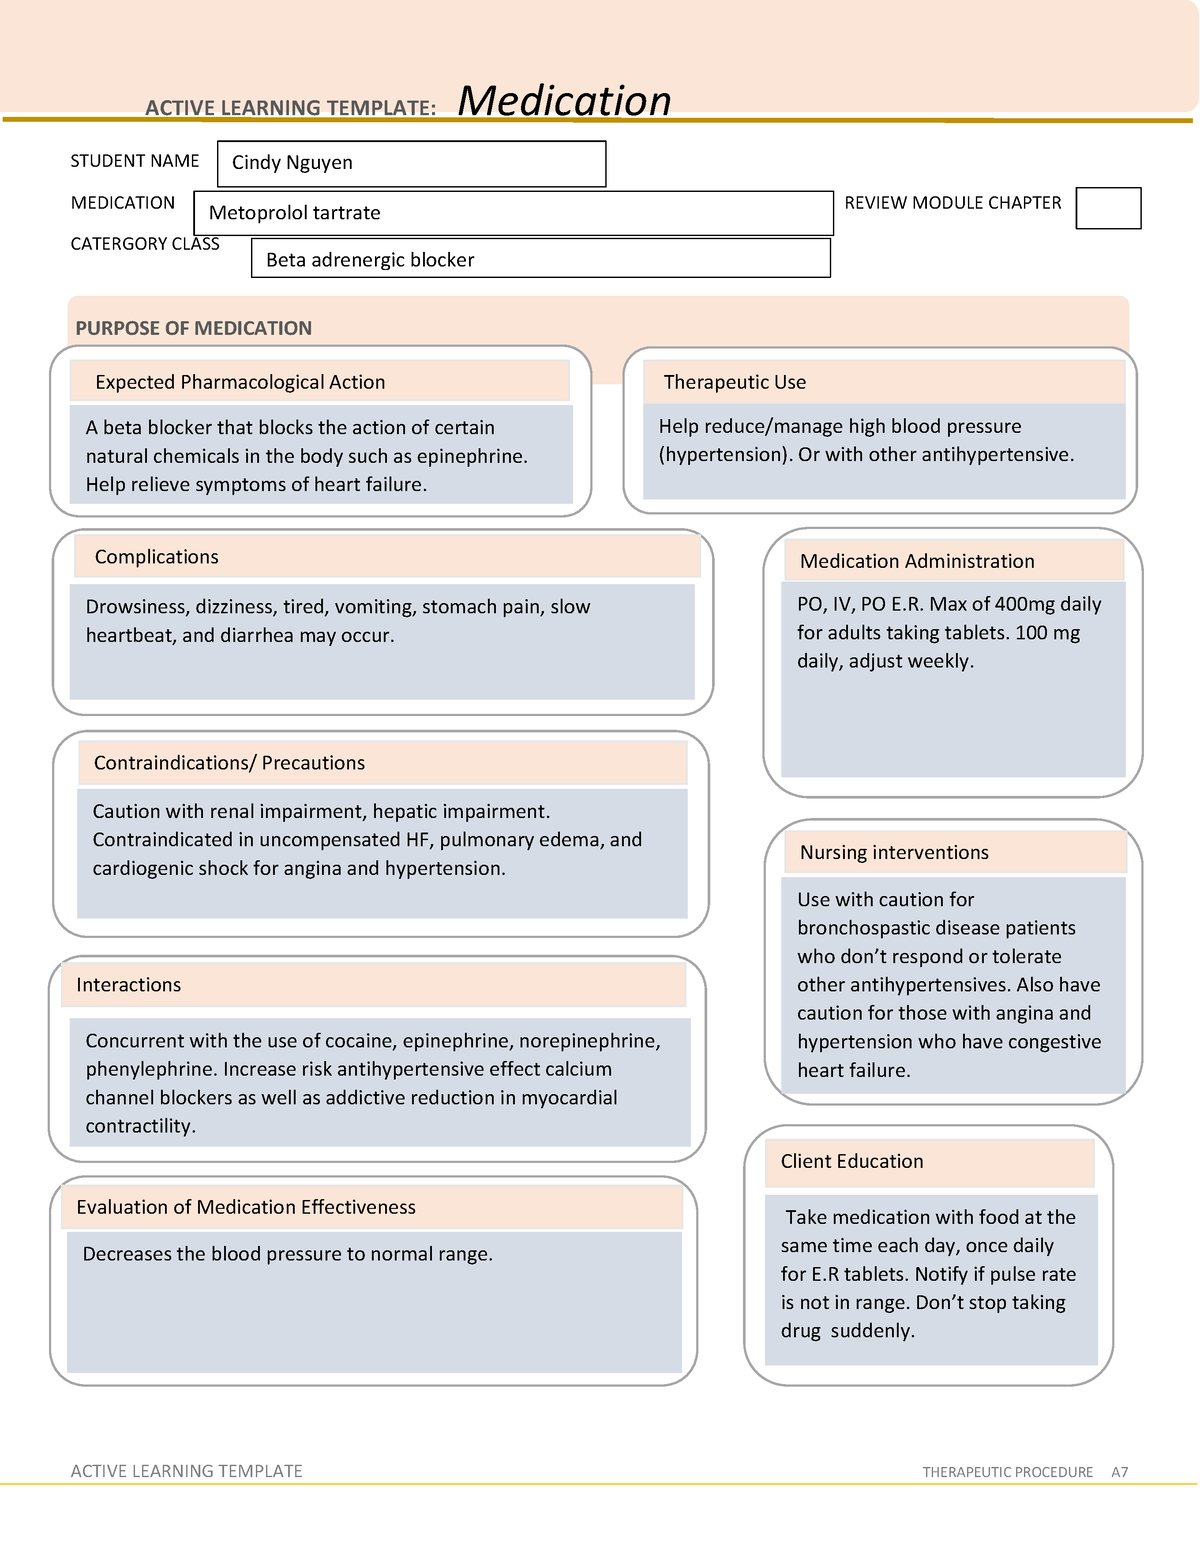 Metoprolol tartrate medication ACTIVE LEARNING TEMPLATE: Medication